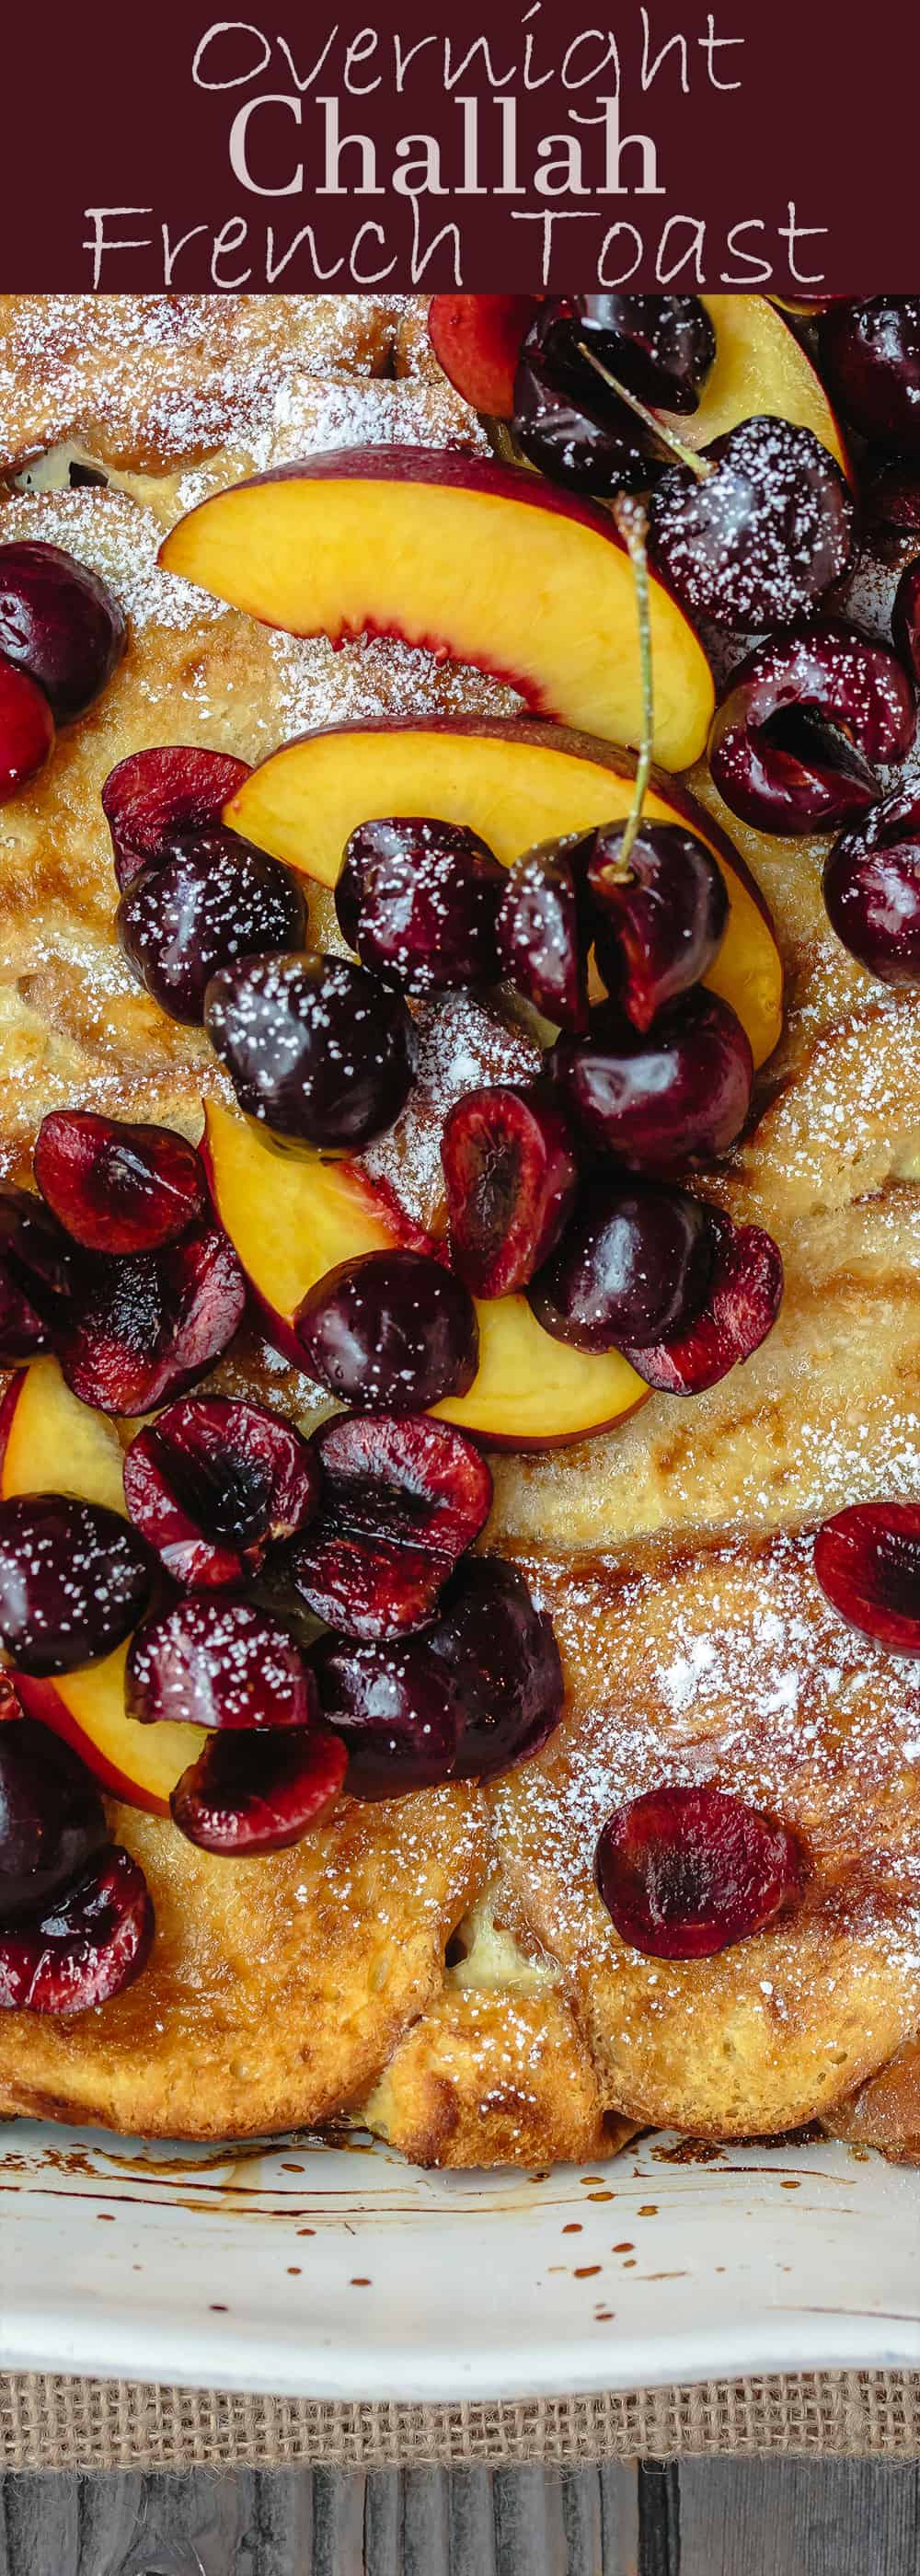 Overnight Baked French Toast Recipe with Challah | The Mediterranean Dish. Stupid easy and healtiher overnight french toast! Challah french toast with a reduced-fat yogurt custard, topped with fresh fruit and honey simple syrup. Prep it overnight and come morning, simply slip into the oven and enjoy your coffee!